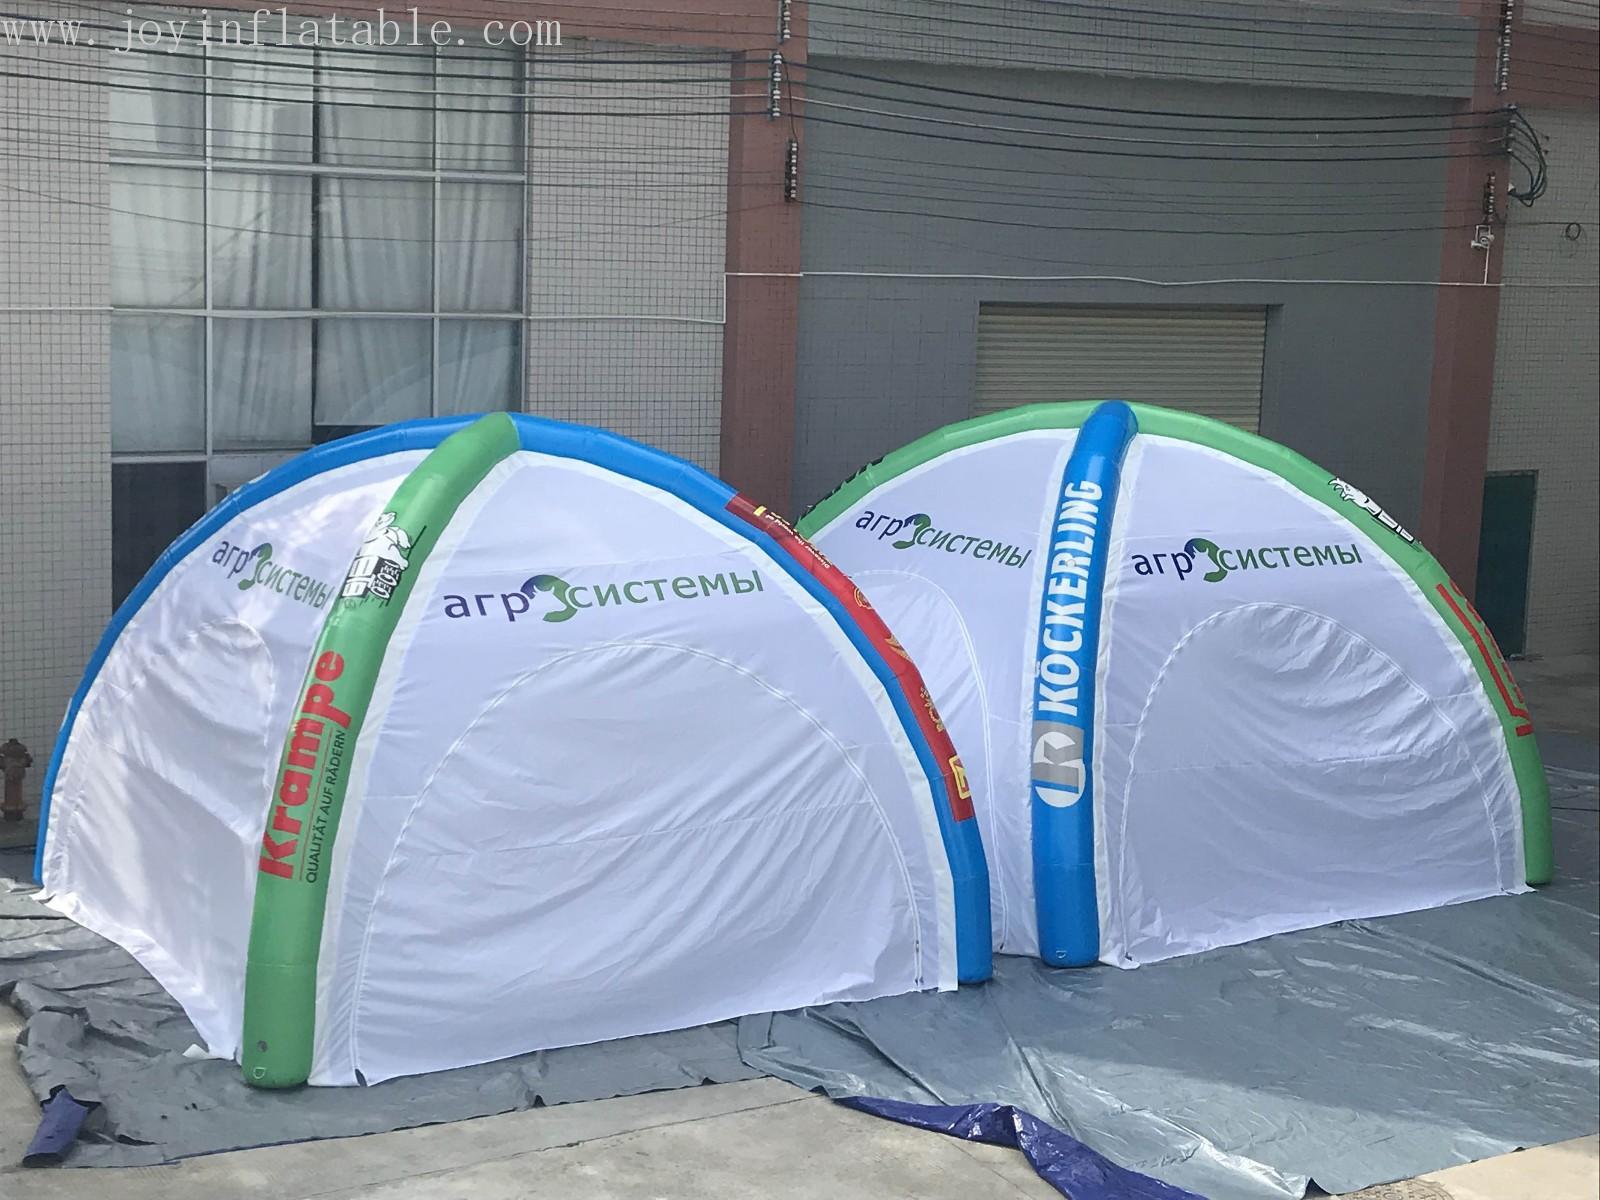 JOY inflatable inflatable canopy tent with good price for kids